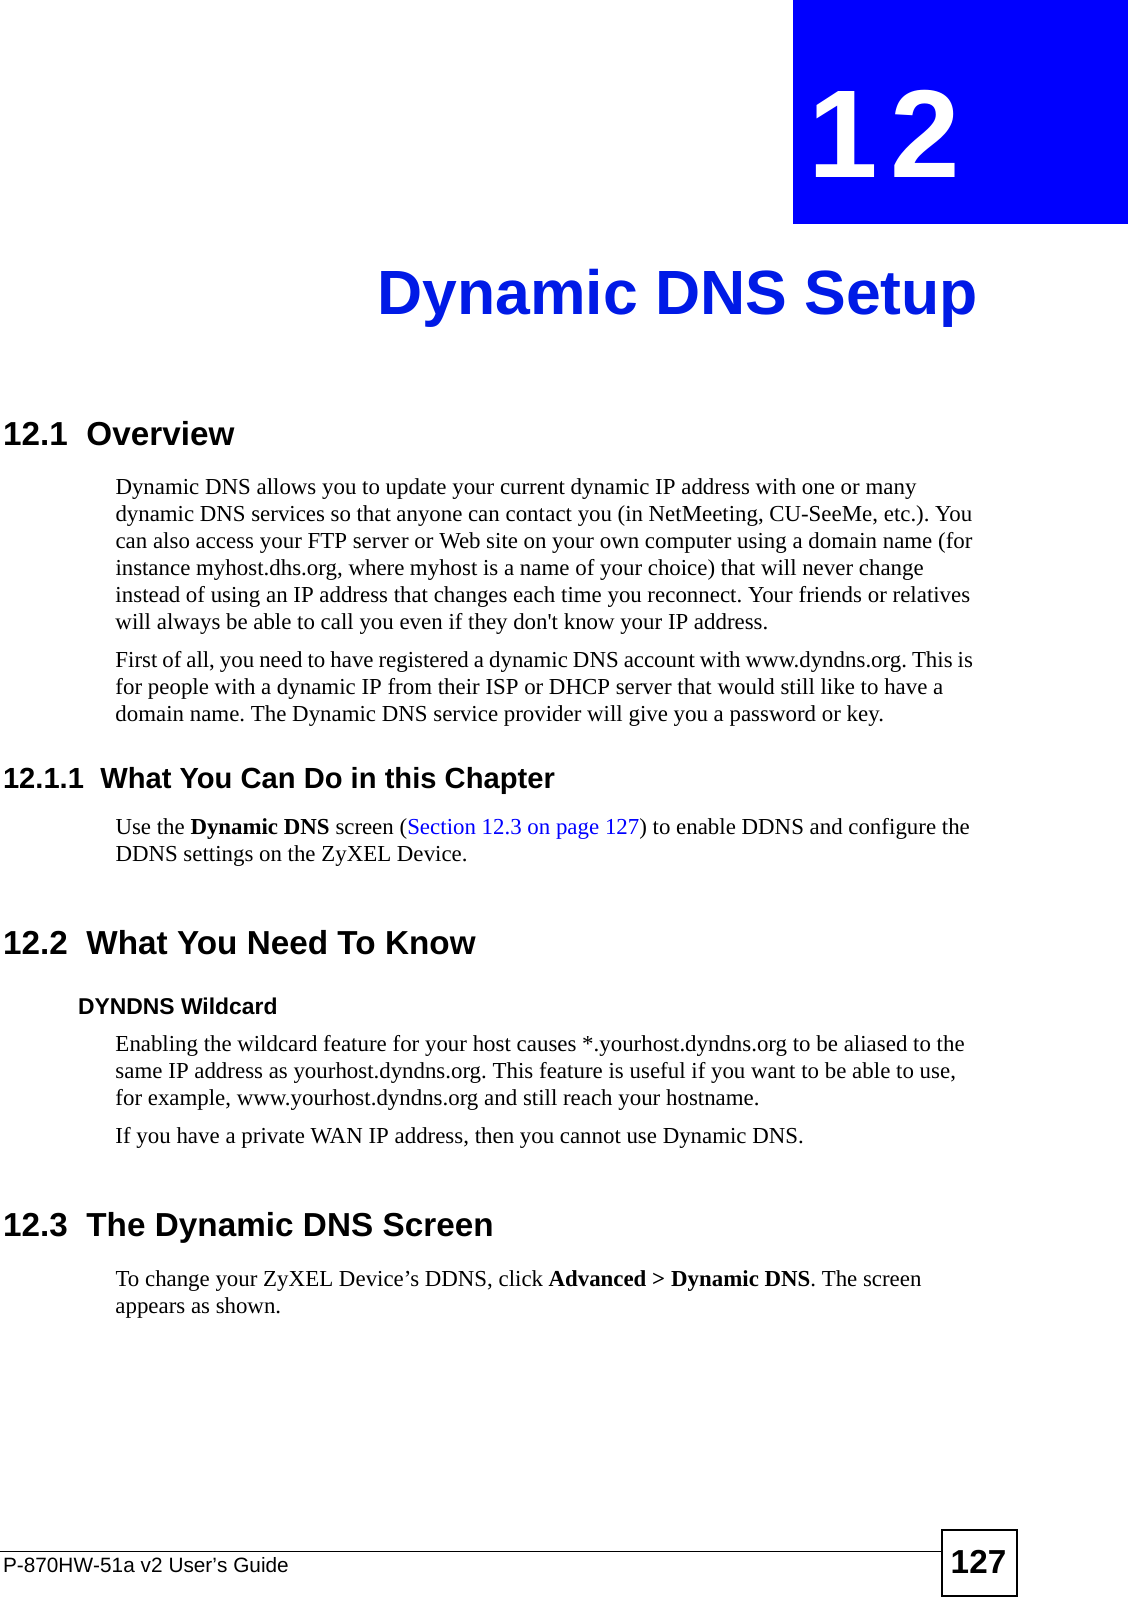 P-870HW-51a v2 User’s Guide 127CHAPTER  12 Dynamic DNS Setup12.1  Overview Dynamic DNS allows you to update your current dynamic IP address with one or many dynamic DNS services so that anyone can contact you (in NetMeeting, CU-SeeMe, etc.). You can also access your FTP server or Web site on your own computer using a domain name (for instance myhost.dhs.org, where myhost is a name of your choice) that will never change instead of using an IP address that changes each time you reconnect. Your friends or relatives will always be able to call you even if they don&apos;t know your IP address.First of all, you need to have registered a dynamic DNS account with www.dyndns.org. This is for people with a dynamic IP from their ISP or DHCP server that would still like to have a domain name. The Dynamic DNS service provider will give you a password or key. 12.1.1  What You Can Do in this ChapterUse the Dynamic DNS screen (Section 12.3 on page 127) to enable DDNS and configure the DDNS settings on the ZyXEL Device.12.2  What You Need To KnowDYNDNS WildcardEnabling the wildcard feature for your host causes *.yourhost.dyndns.org to be aliased to the same IP address as yourhost.dyndns.org. This feature is useful if you want to be able to use, for example, www.yourhost.dyndns.org and still reach your hostname.If you have a private WAN IP address, then you cannot use Dynamic DNS.12.3  The Dynamic DNS Screen To change your ZyXEL Device’s DDNS, click Advanced &gt; Dynamic DNS. The screen appears as shown.